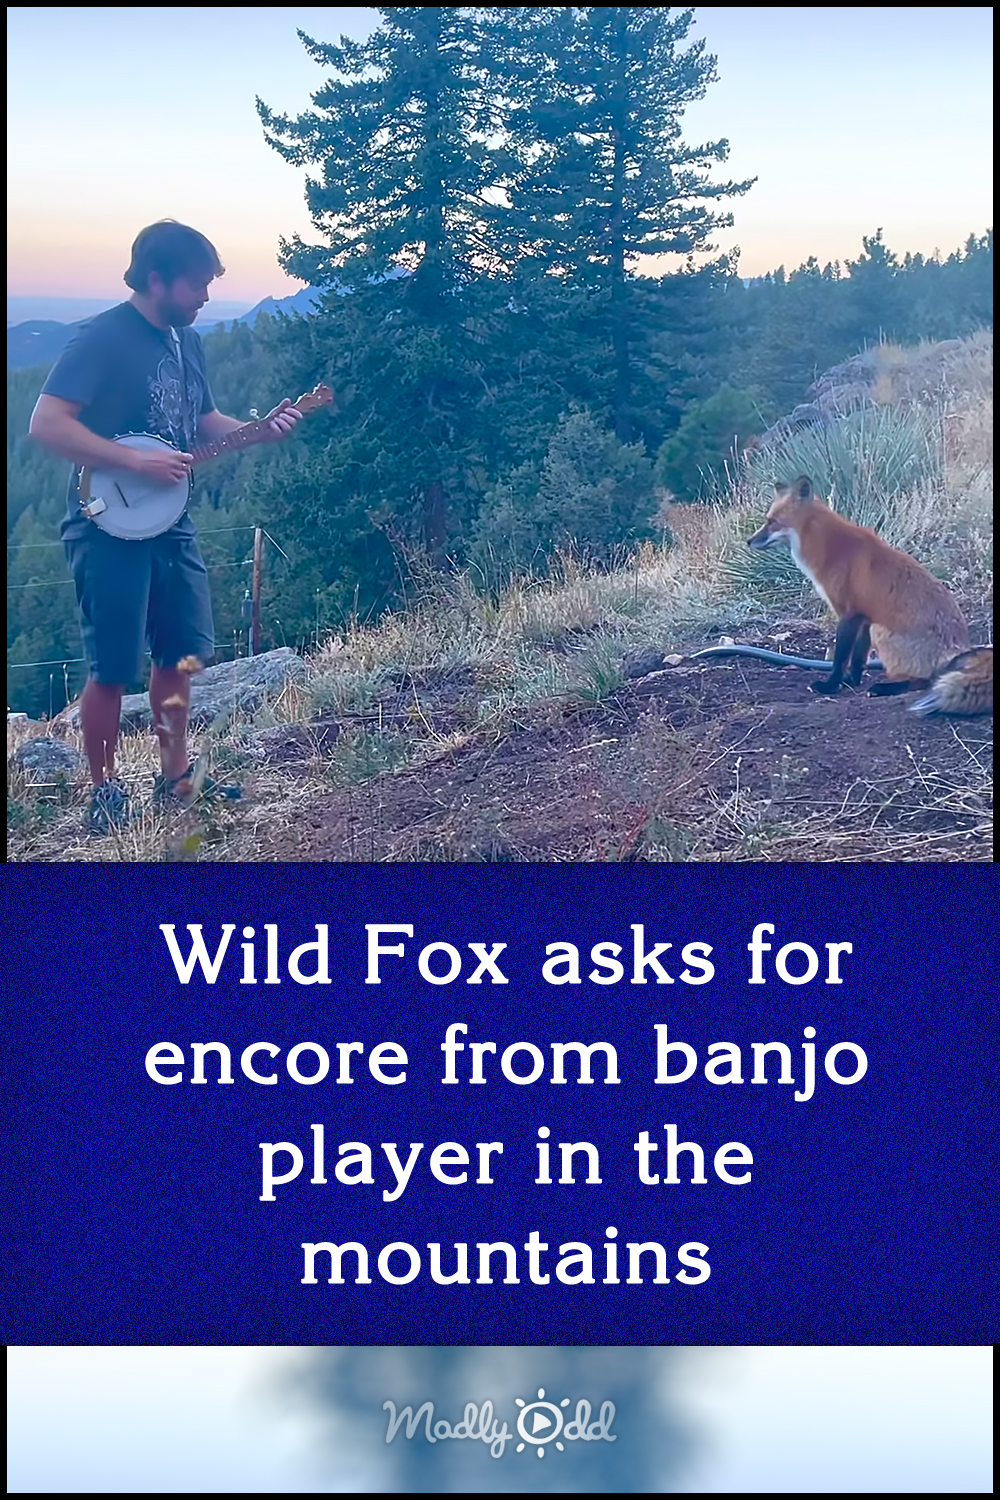 Wild Fox asks for encore from banjo player in the mountains